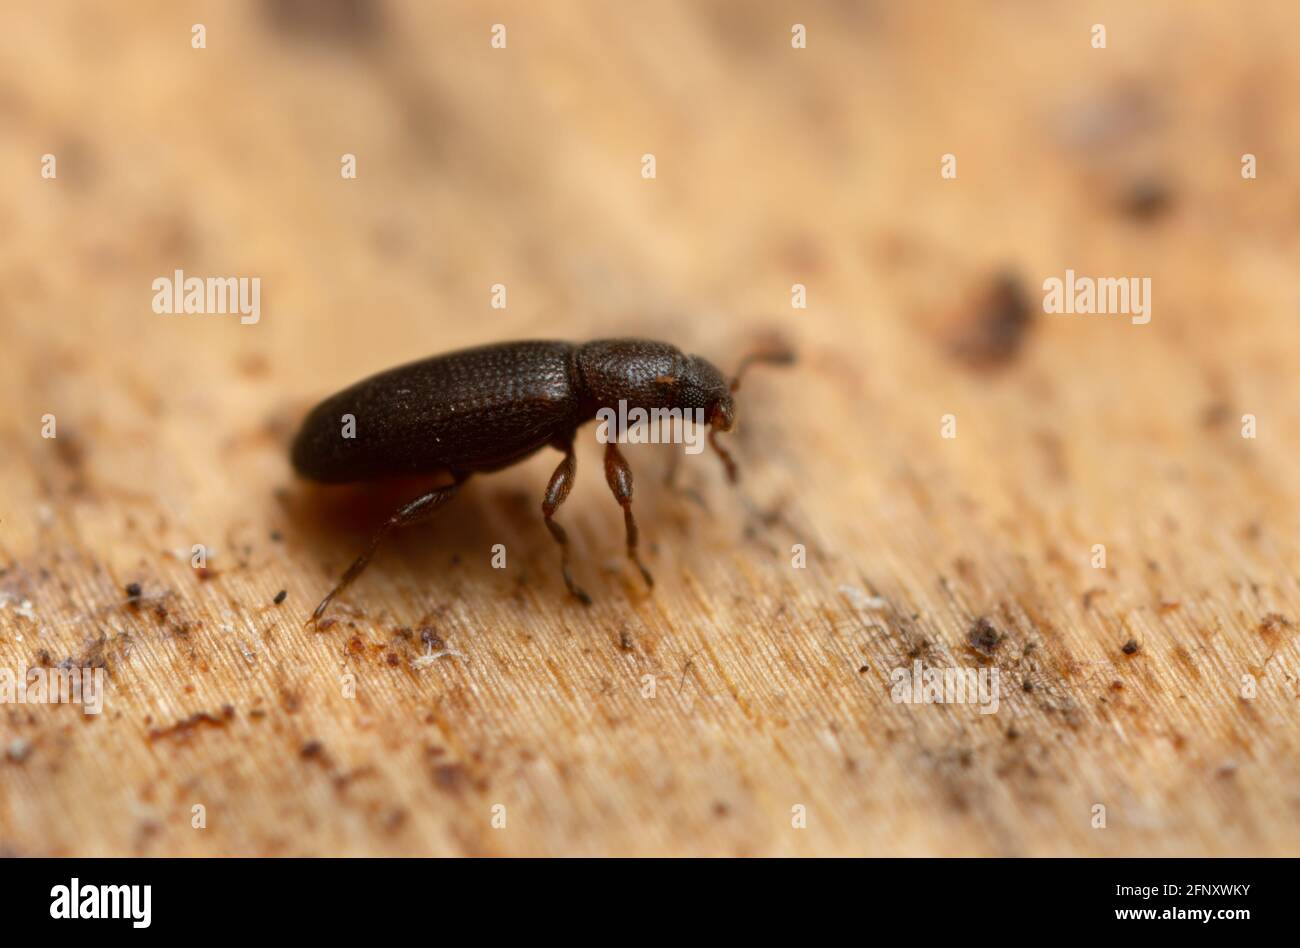 Minute brown scavenger beetle, Corticaria on wood Stock Photo